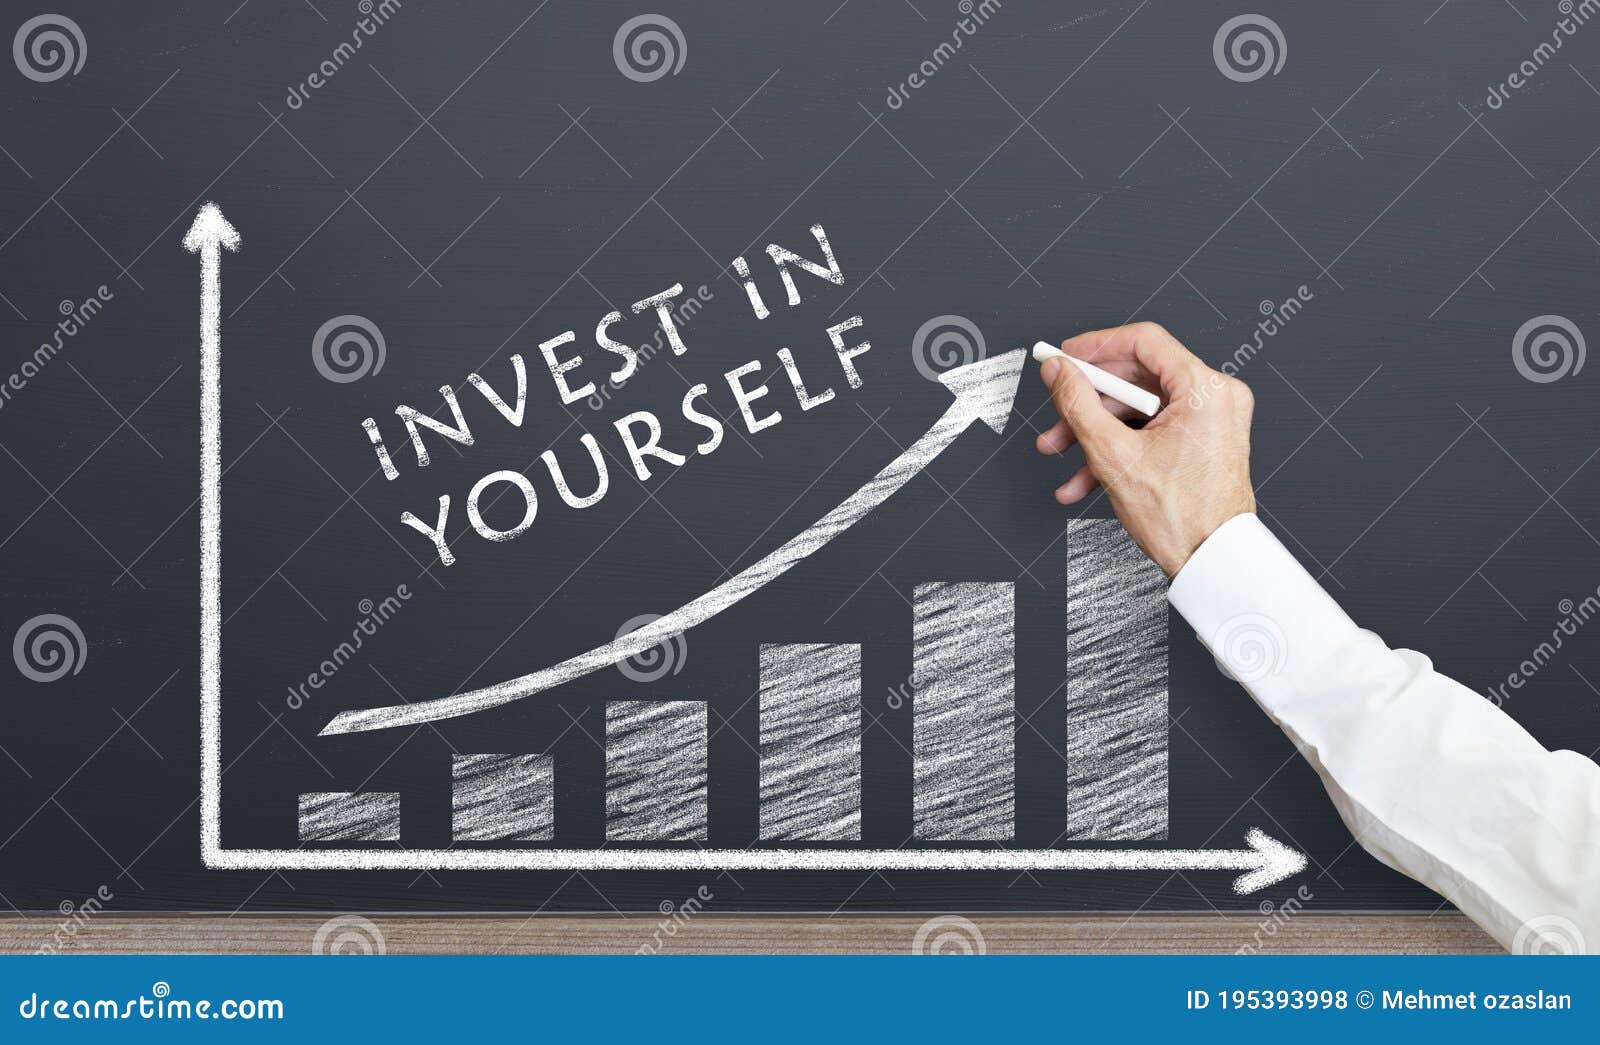 Personal Development Concept. The Concept Of Self Investment In ...